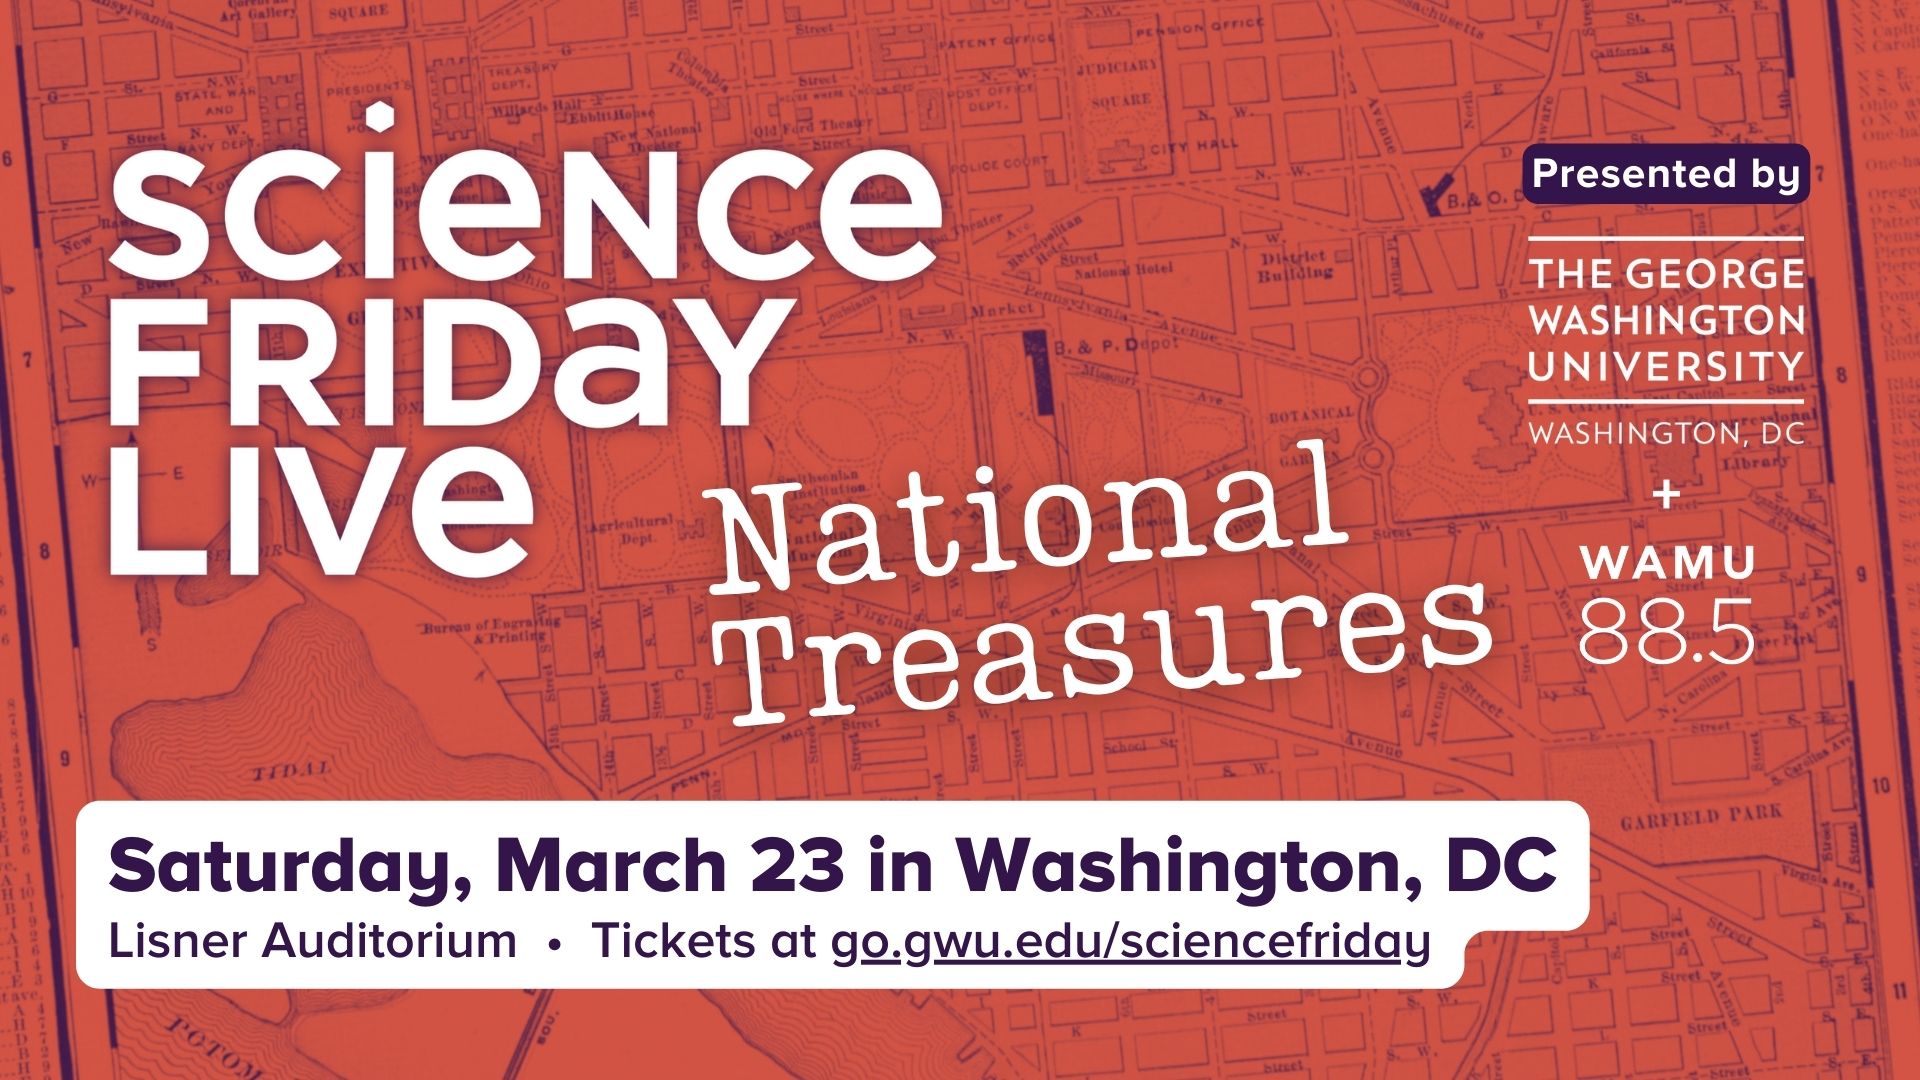 Event promotional image. Text reads "Science Friday Live. National Treasures, Saturday, March 23 in Washington, DC. Lisner Auditorium. Tickets at go.gwu.edu/sciencefriday. Presented by The George Washington University, Washington DC and WAMY 88.5". The background is a duotone image of an old map of DC in red and purple.